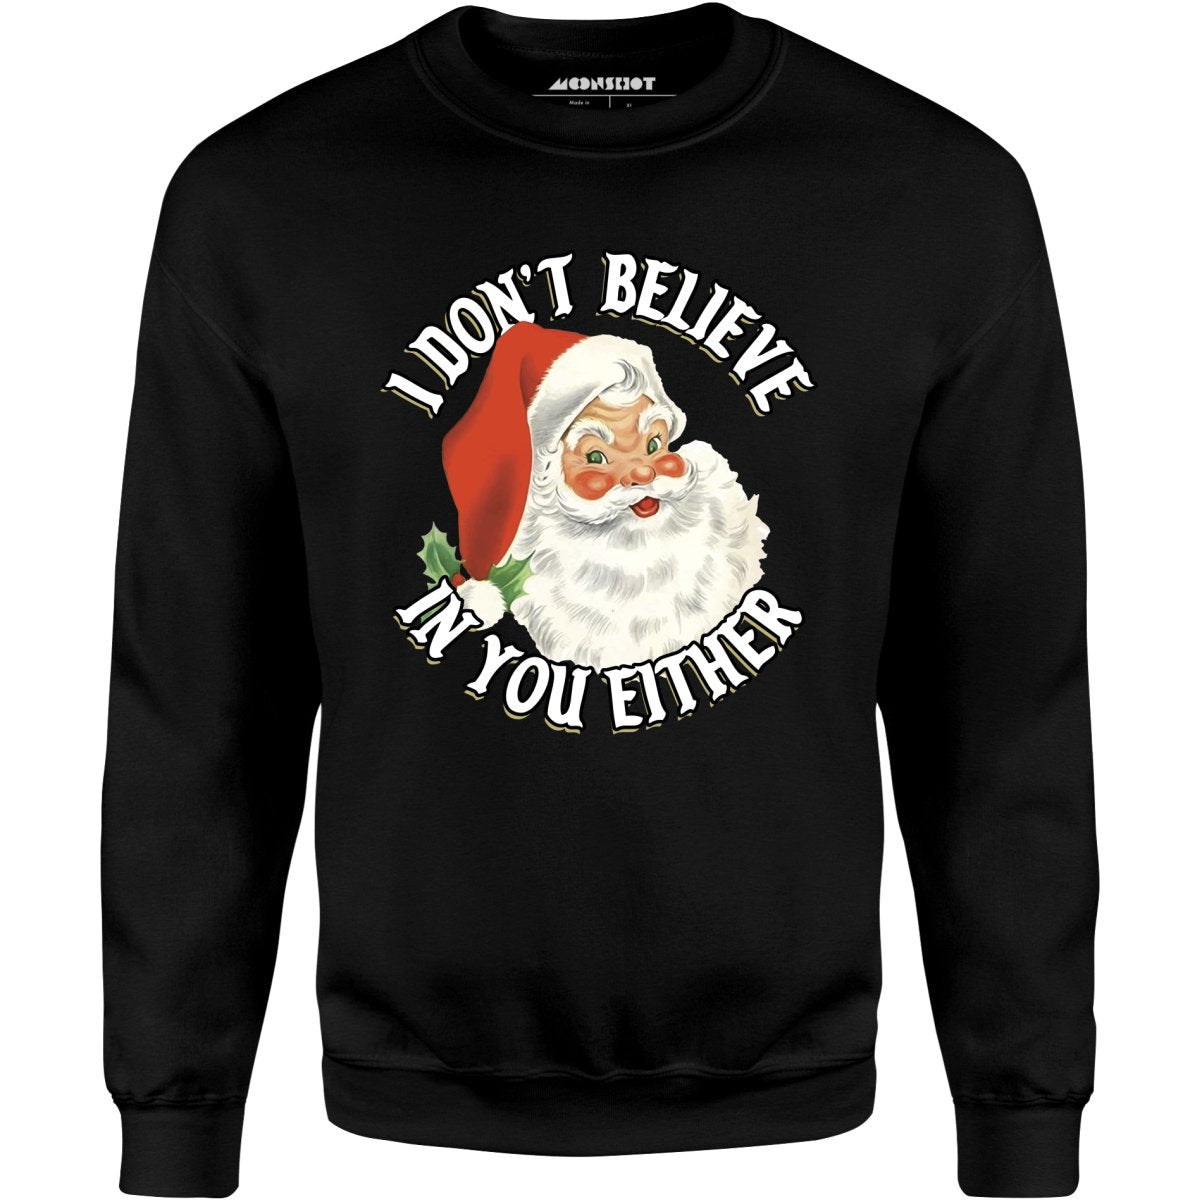 I Don't Believe in You Either - Unisex Sweatshirt